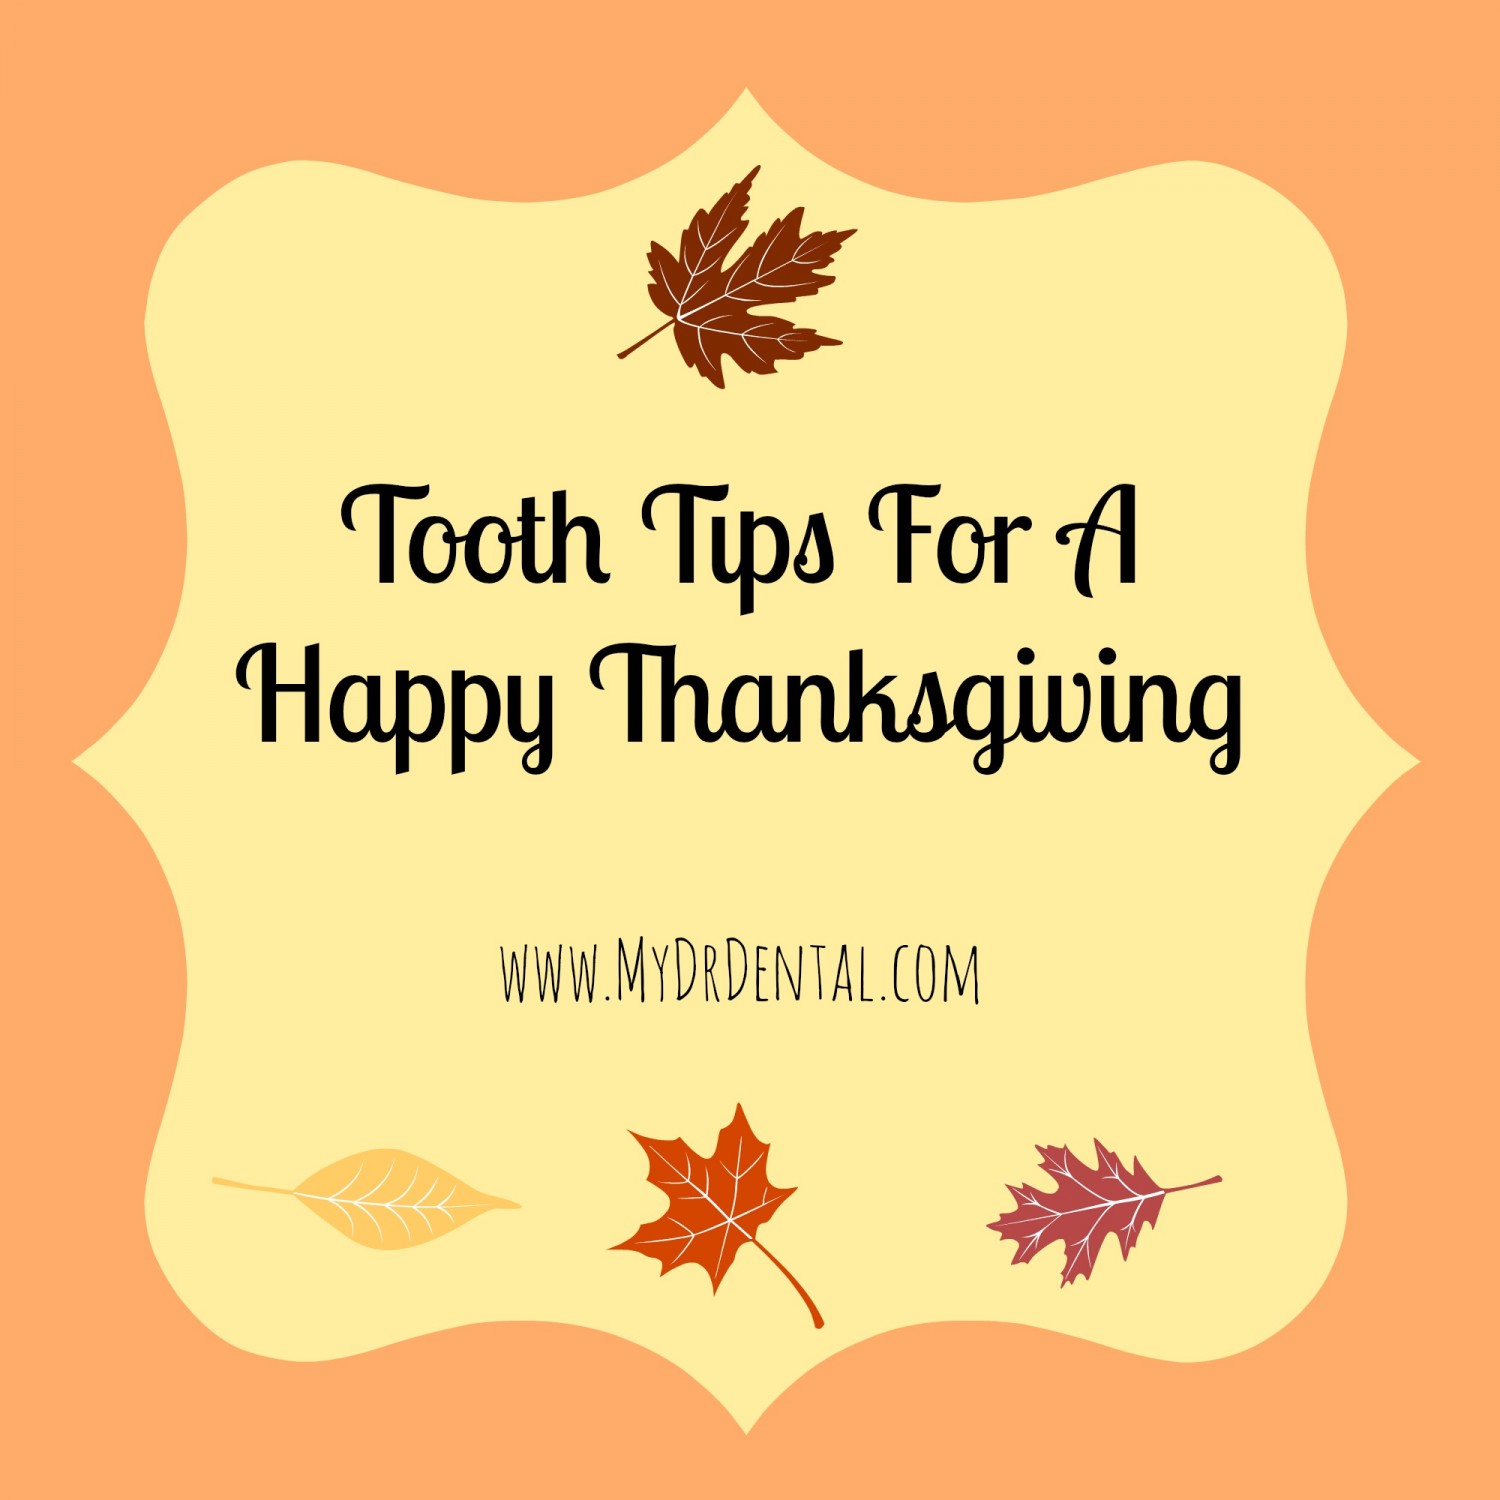 Tooth Tips for a Happy Thanksgiving